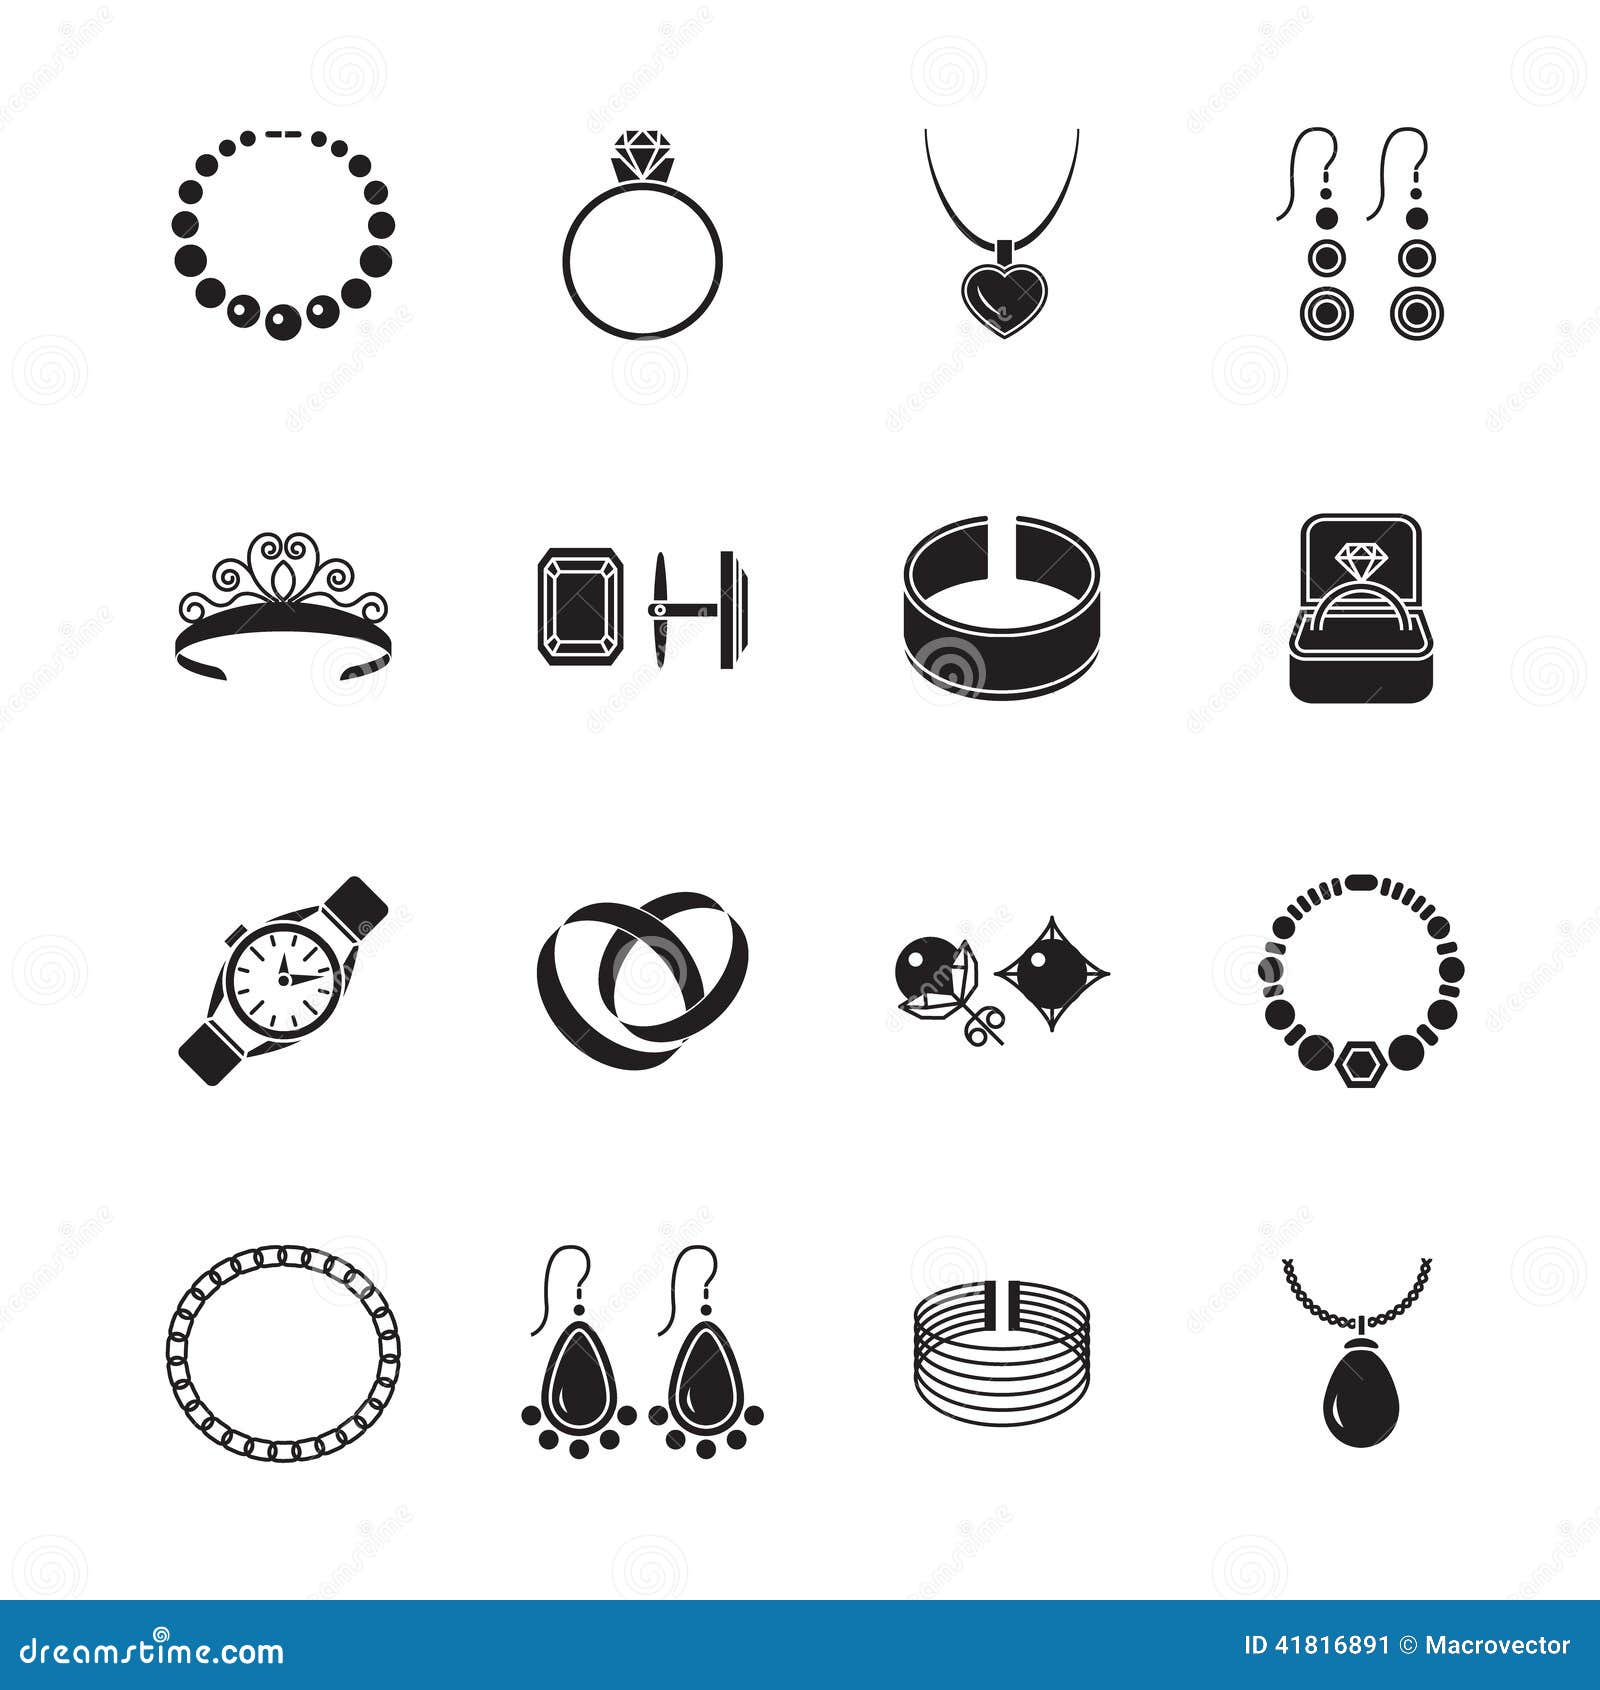 Jewelry icon black stock vector. Illustration of business - 41816891